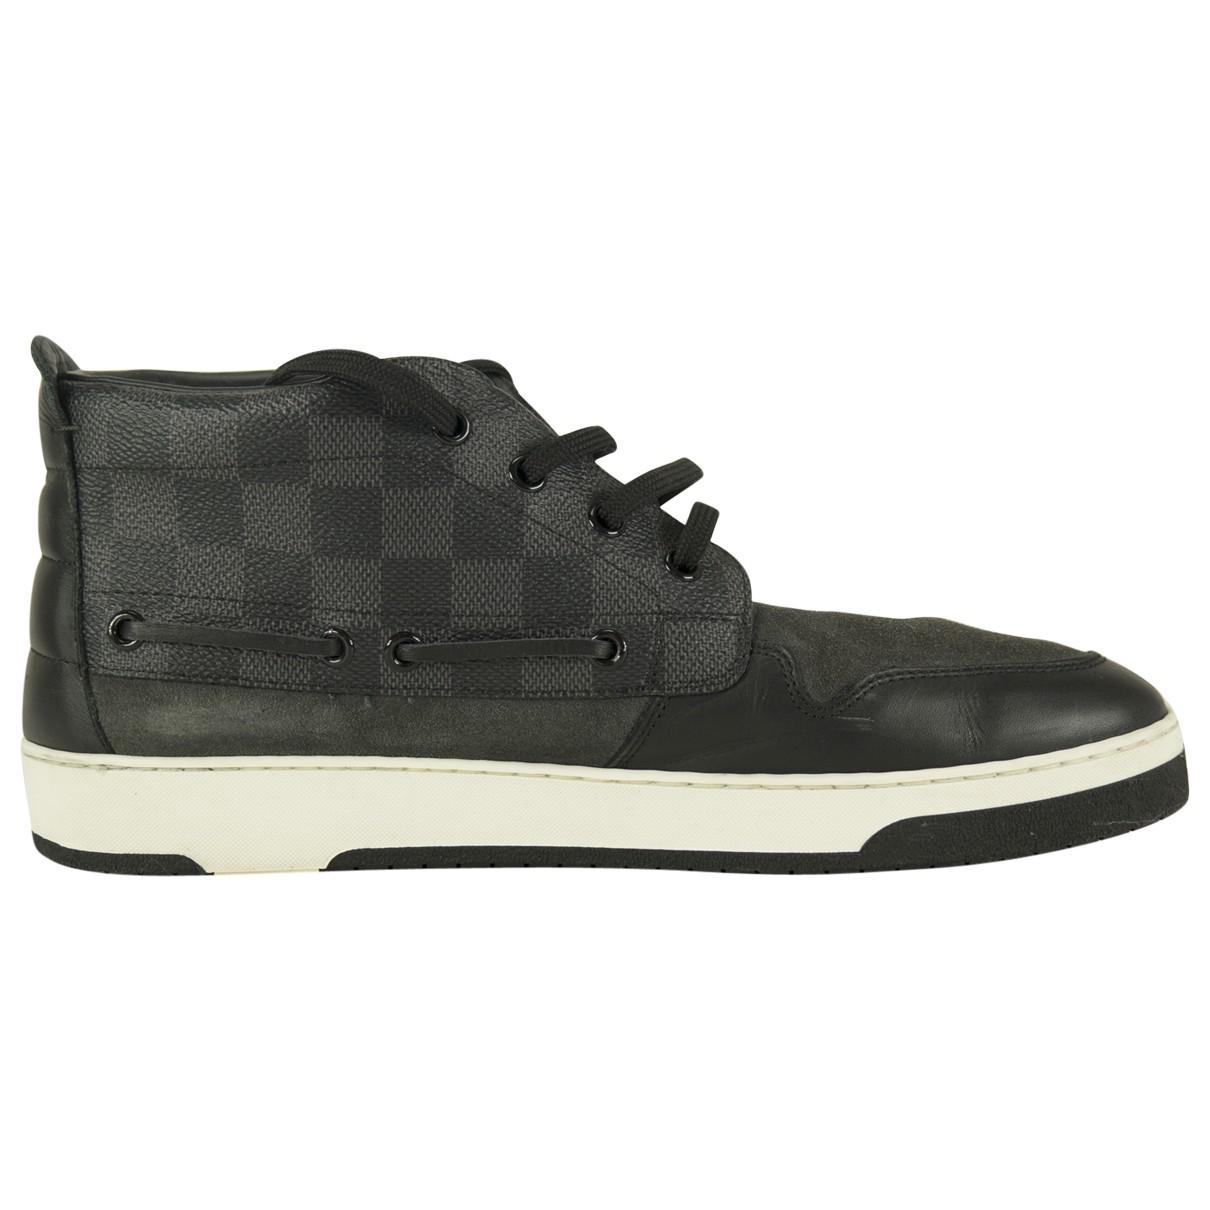 Louis Vuitton Pre-owned Leather High Trainers in Black for Men - Lyst